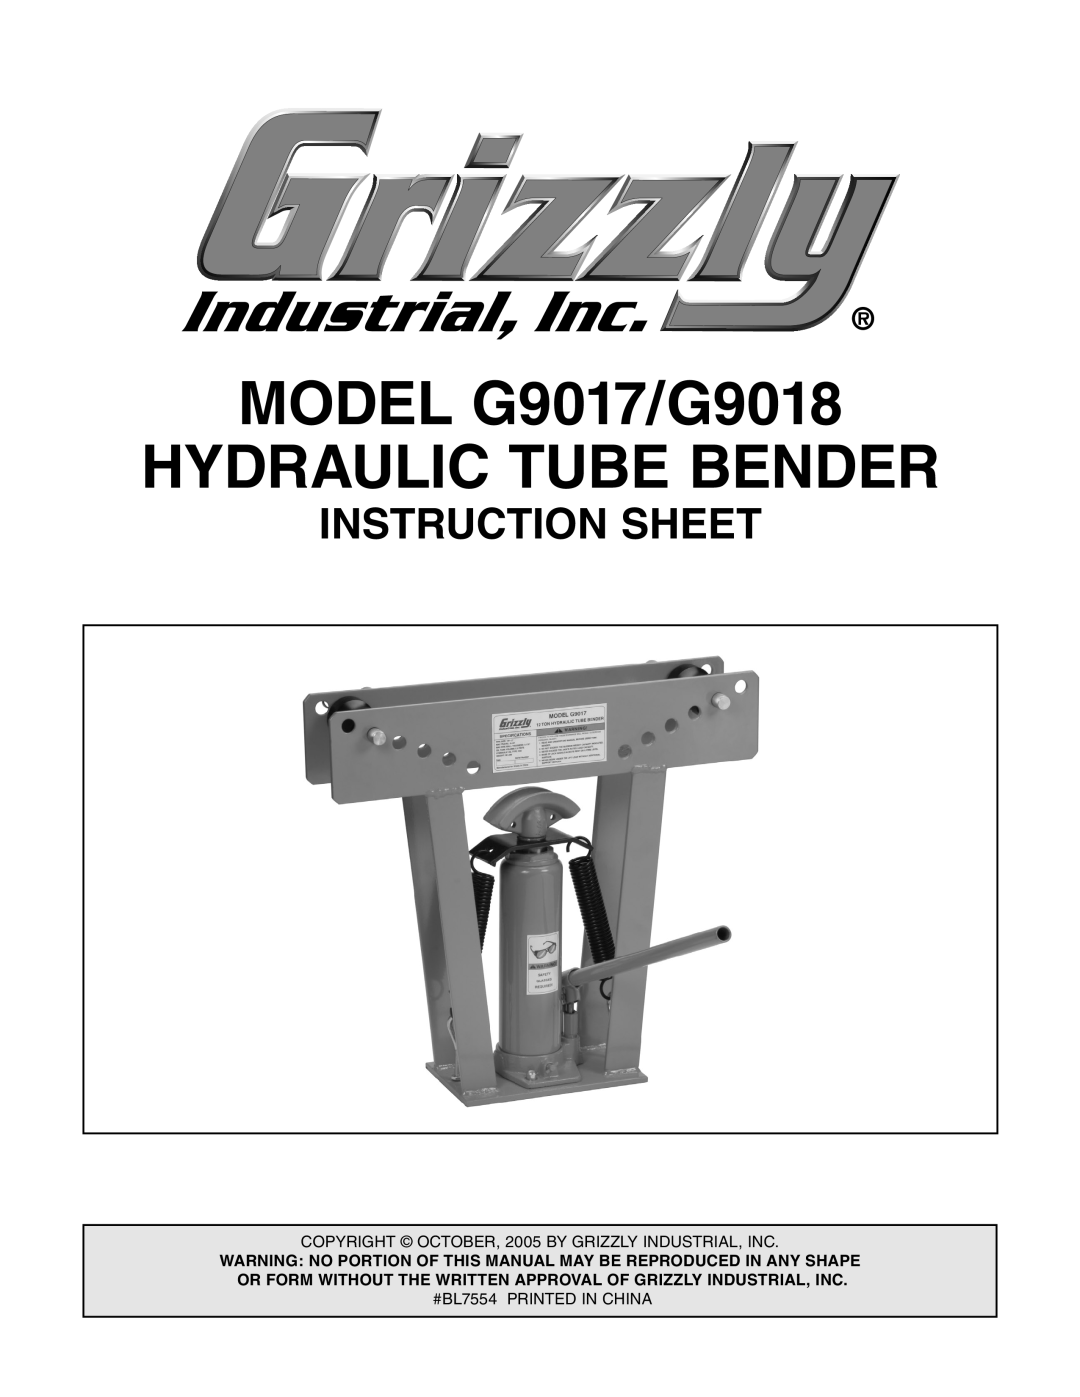 Grizzly manual MODEL G9017/G9018 HYDRAULIC TUBE BENDER, Instruction Sheet 